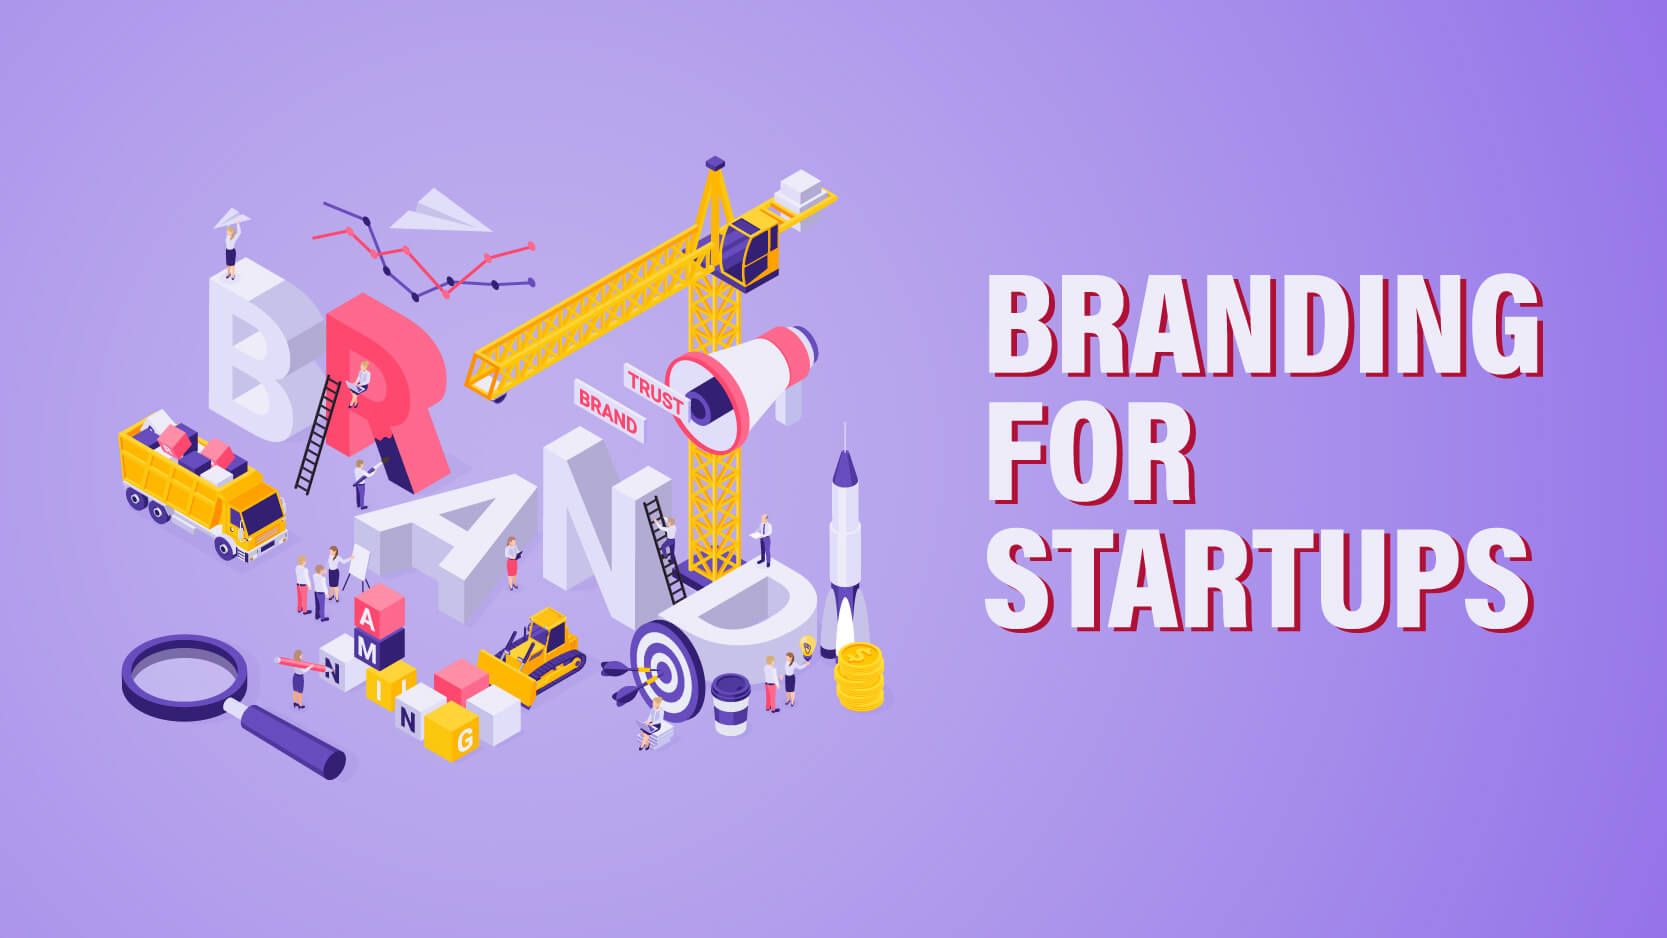 Why Branding Is Important for Startups